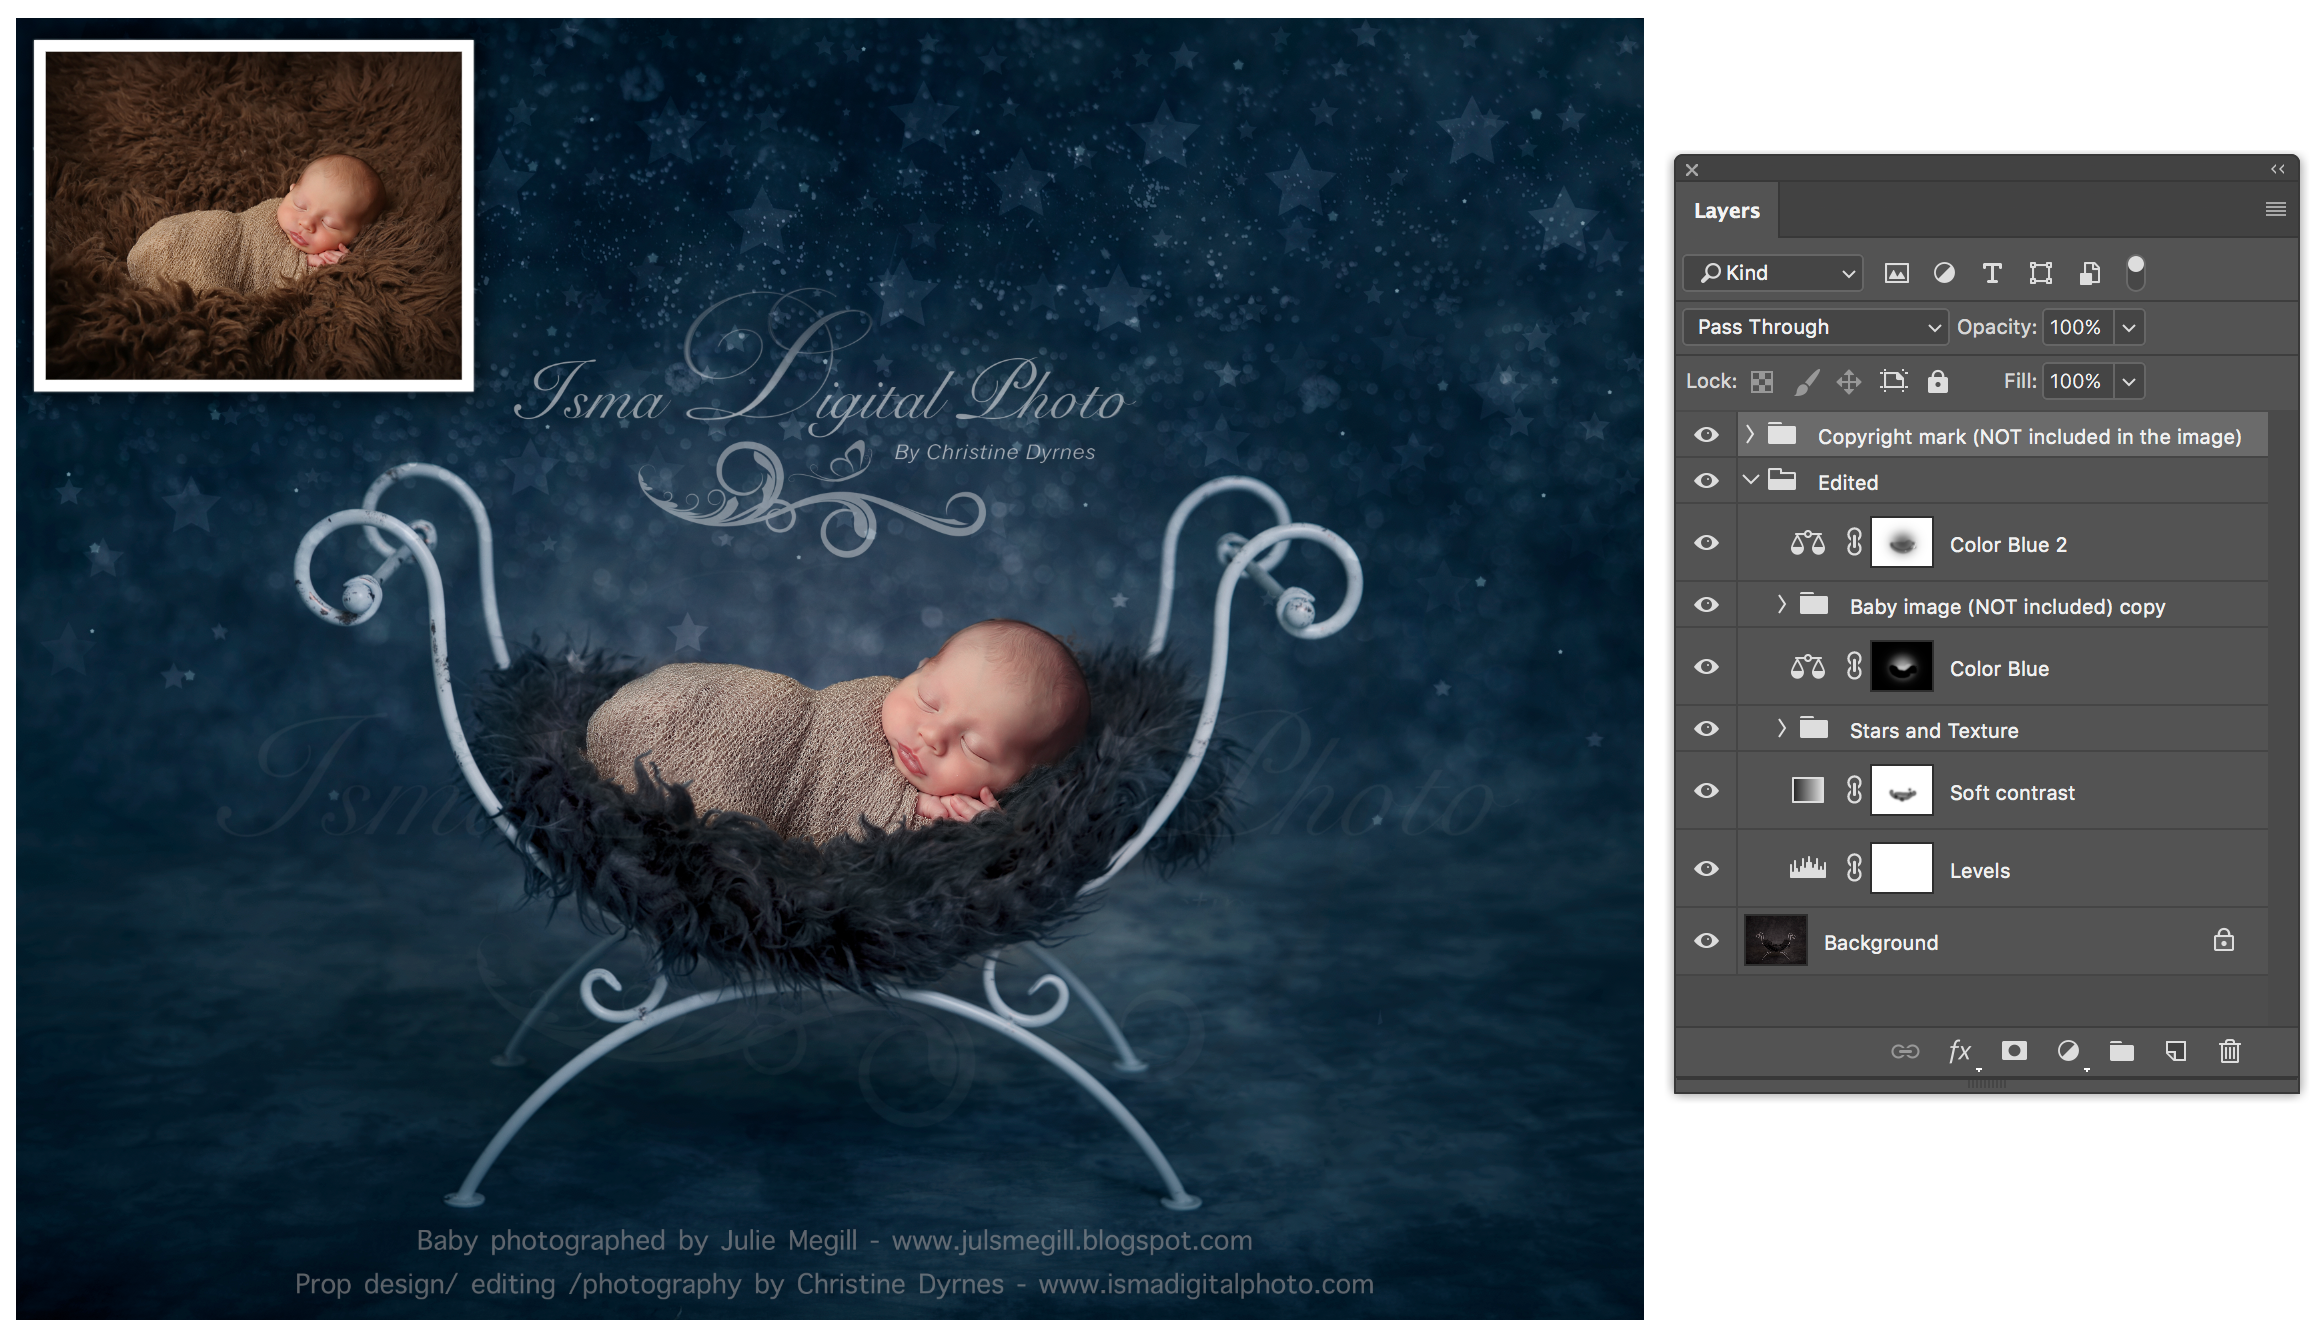 Digital Backdrop /Props for Newborn /baby photography - High resolution digital backdrop /background - One JPG and one PSD file with layers